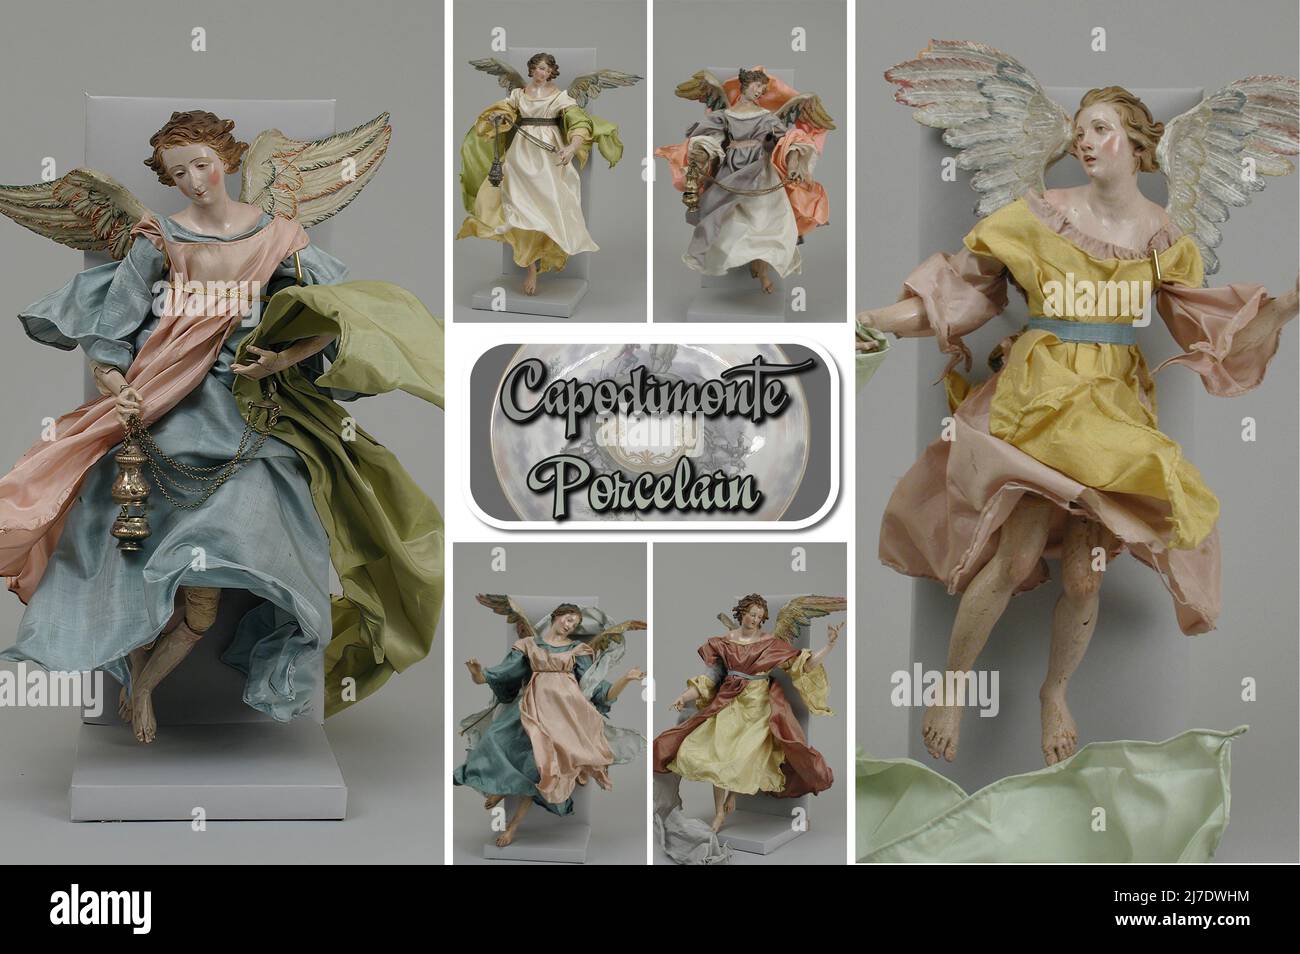 Beautiful figurines in fine Capodimonte ceramics, finely worked, depicting Angels on the day of the nativity, produced in Naples (Italy) in 1800. Stock Photo